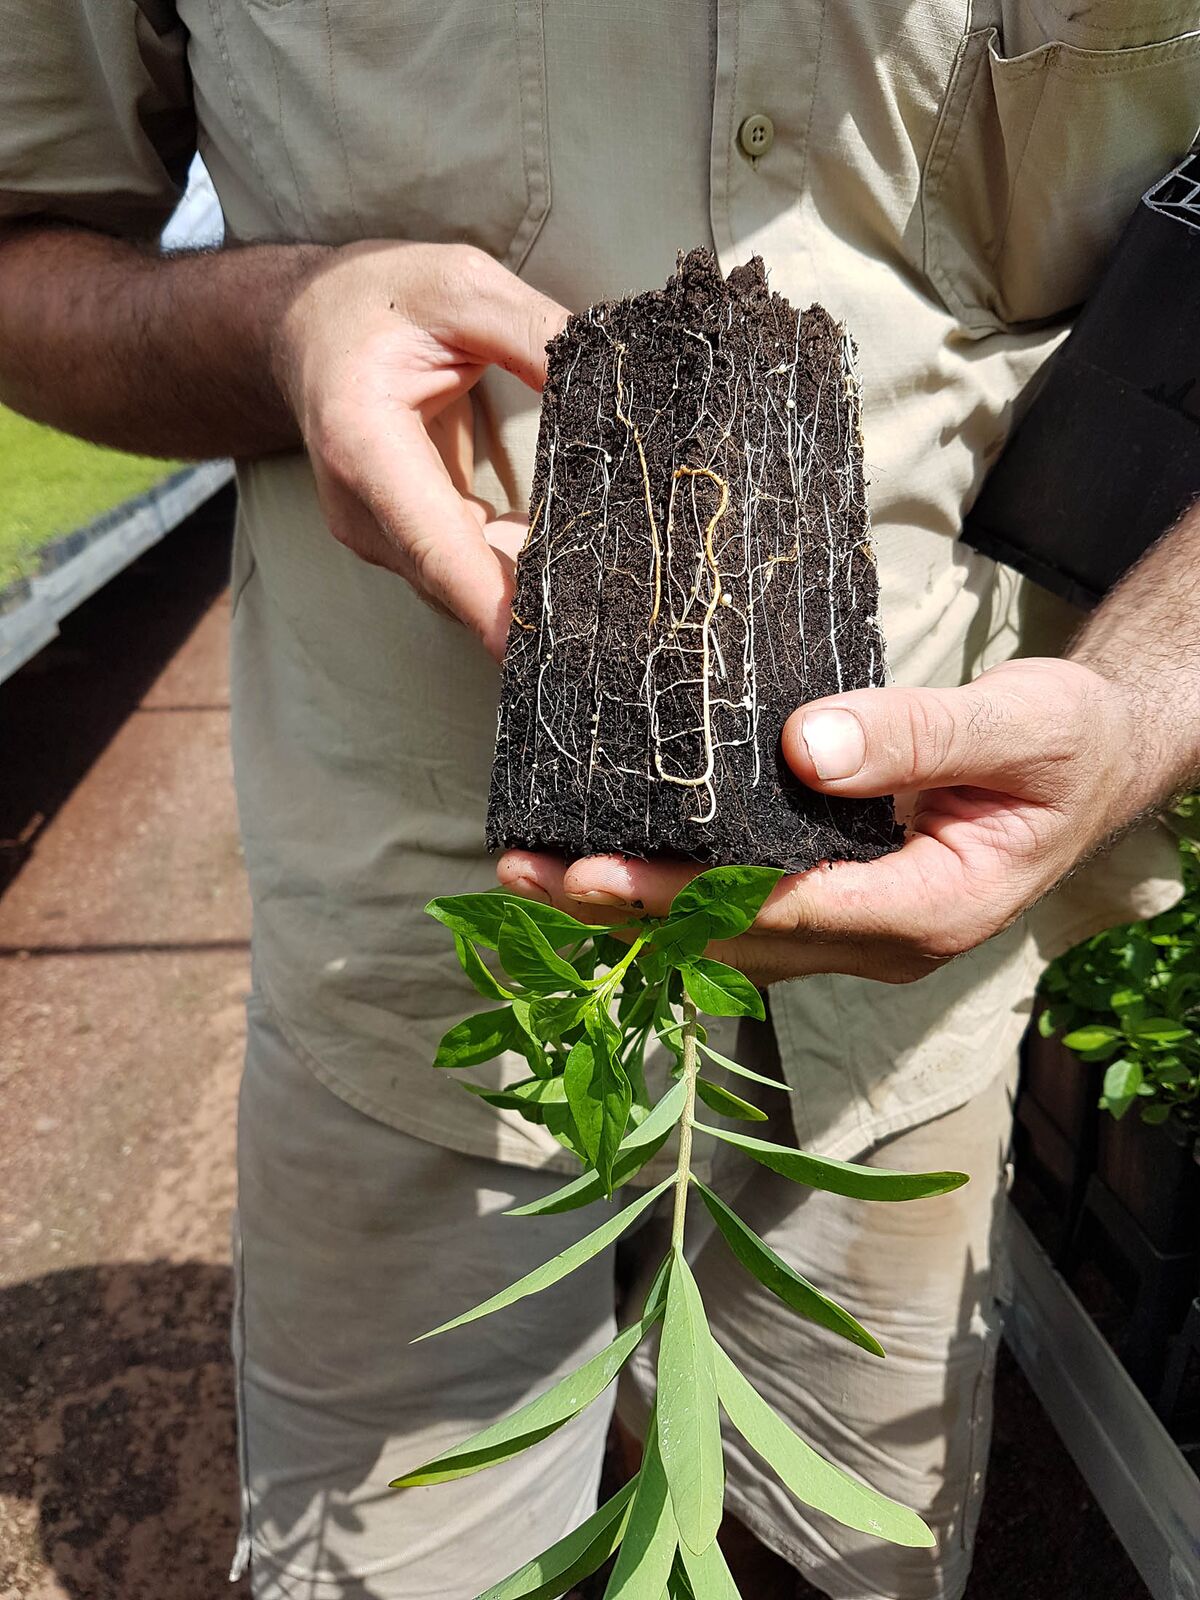 australian sandalwood plantation is about to make its owners a lot